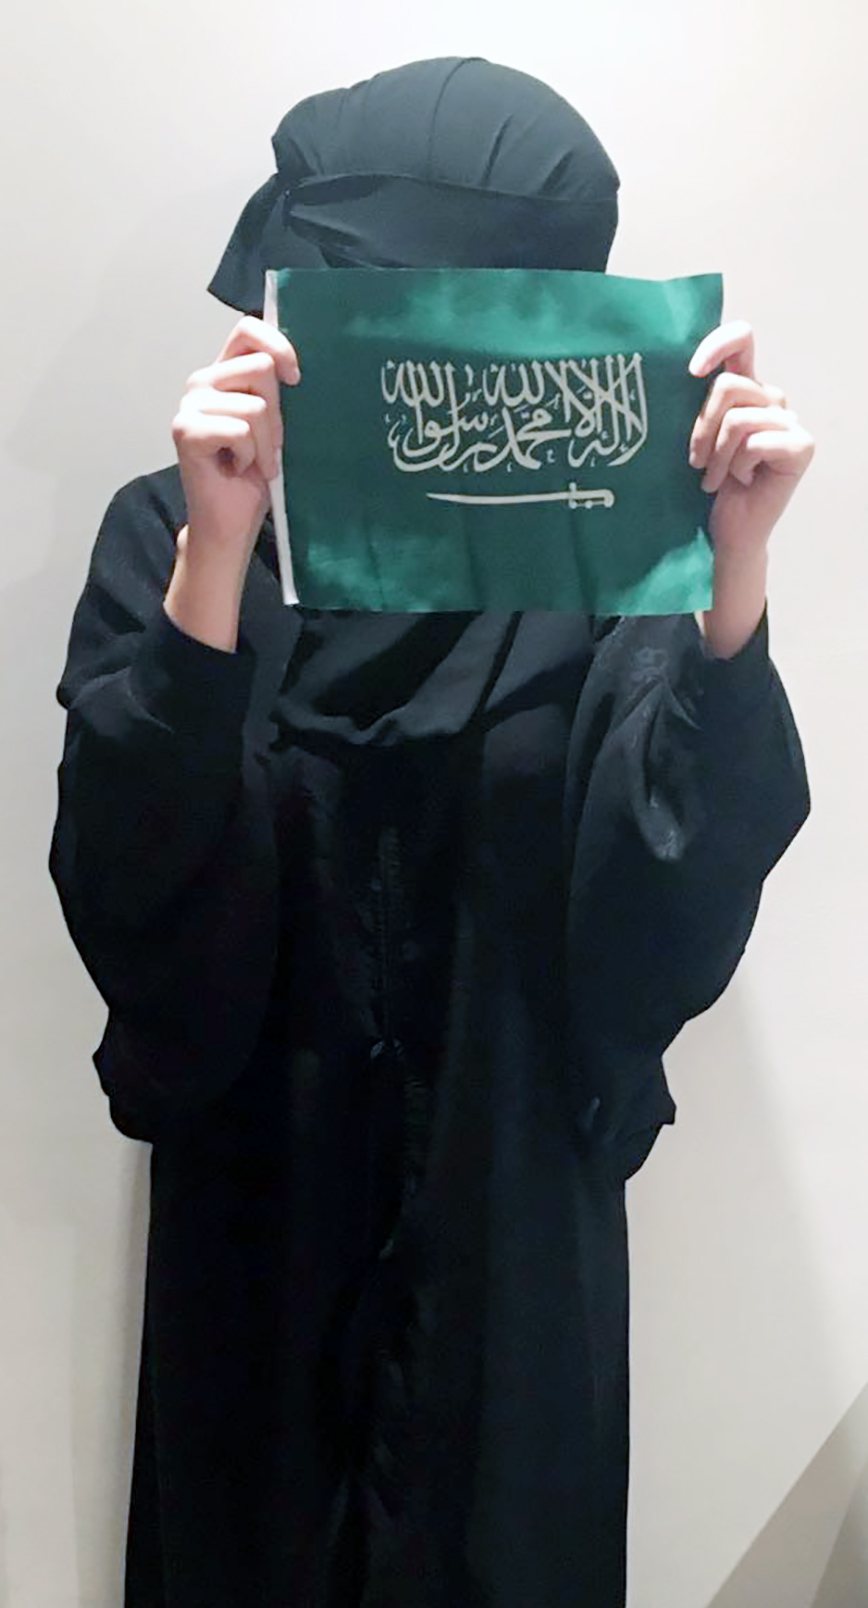 Many women in Saudi Arabia have posted photos of themselves on social media with captions protesting the country’s guardianship system and female driving ban. Photo courtesy of a confidential source